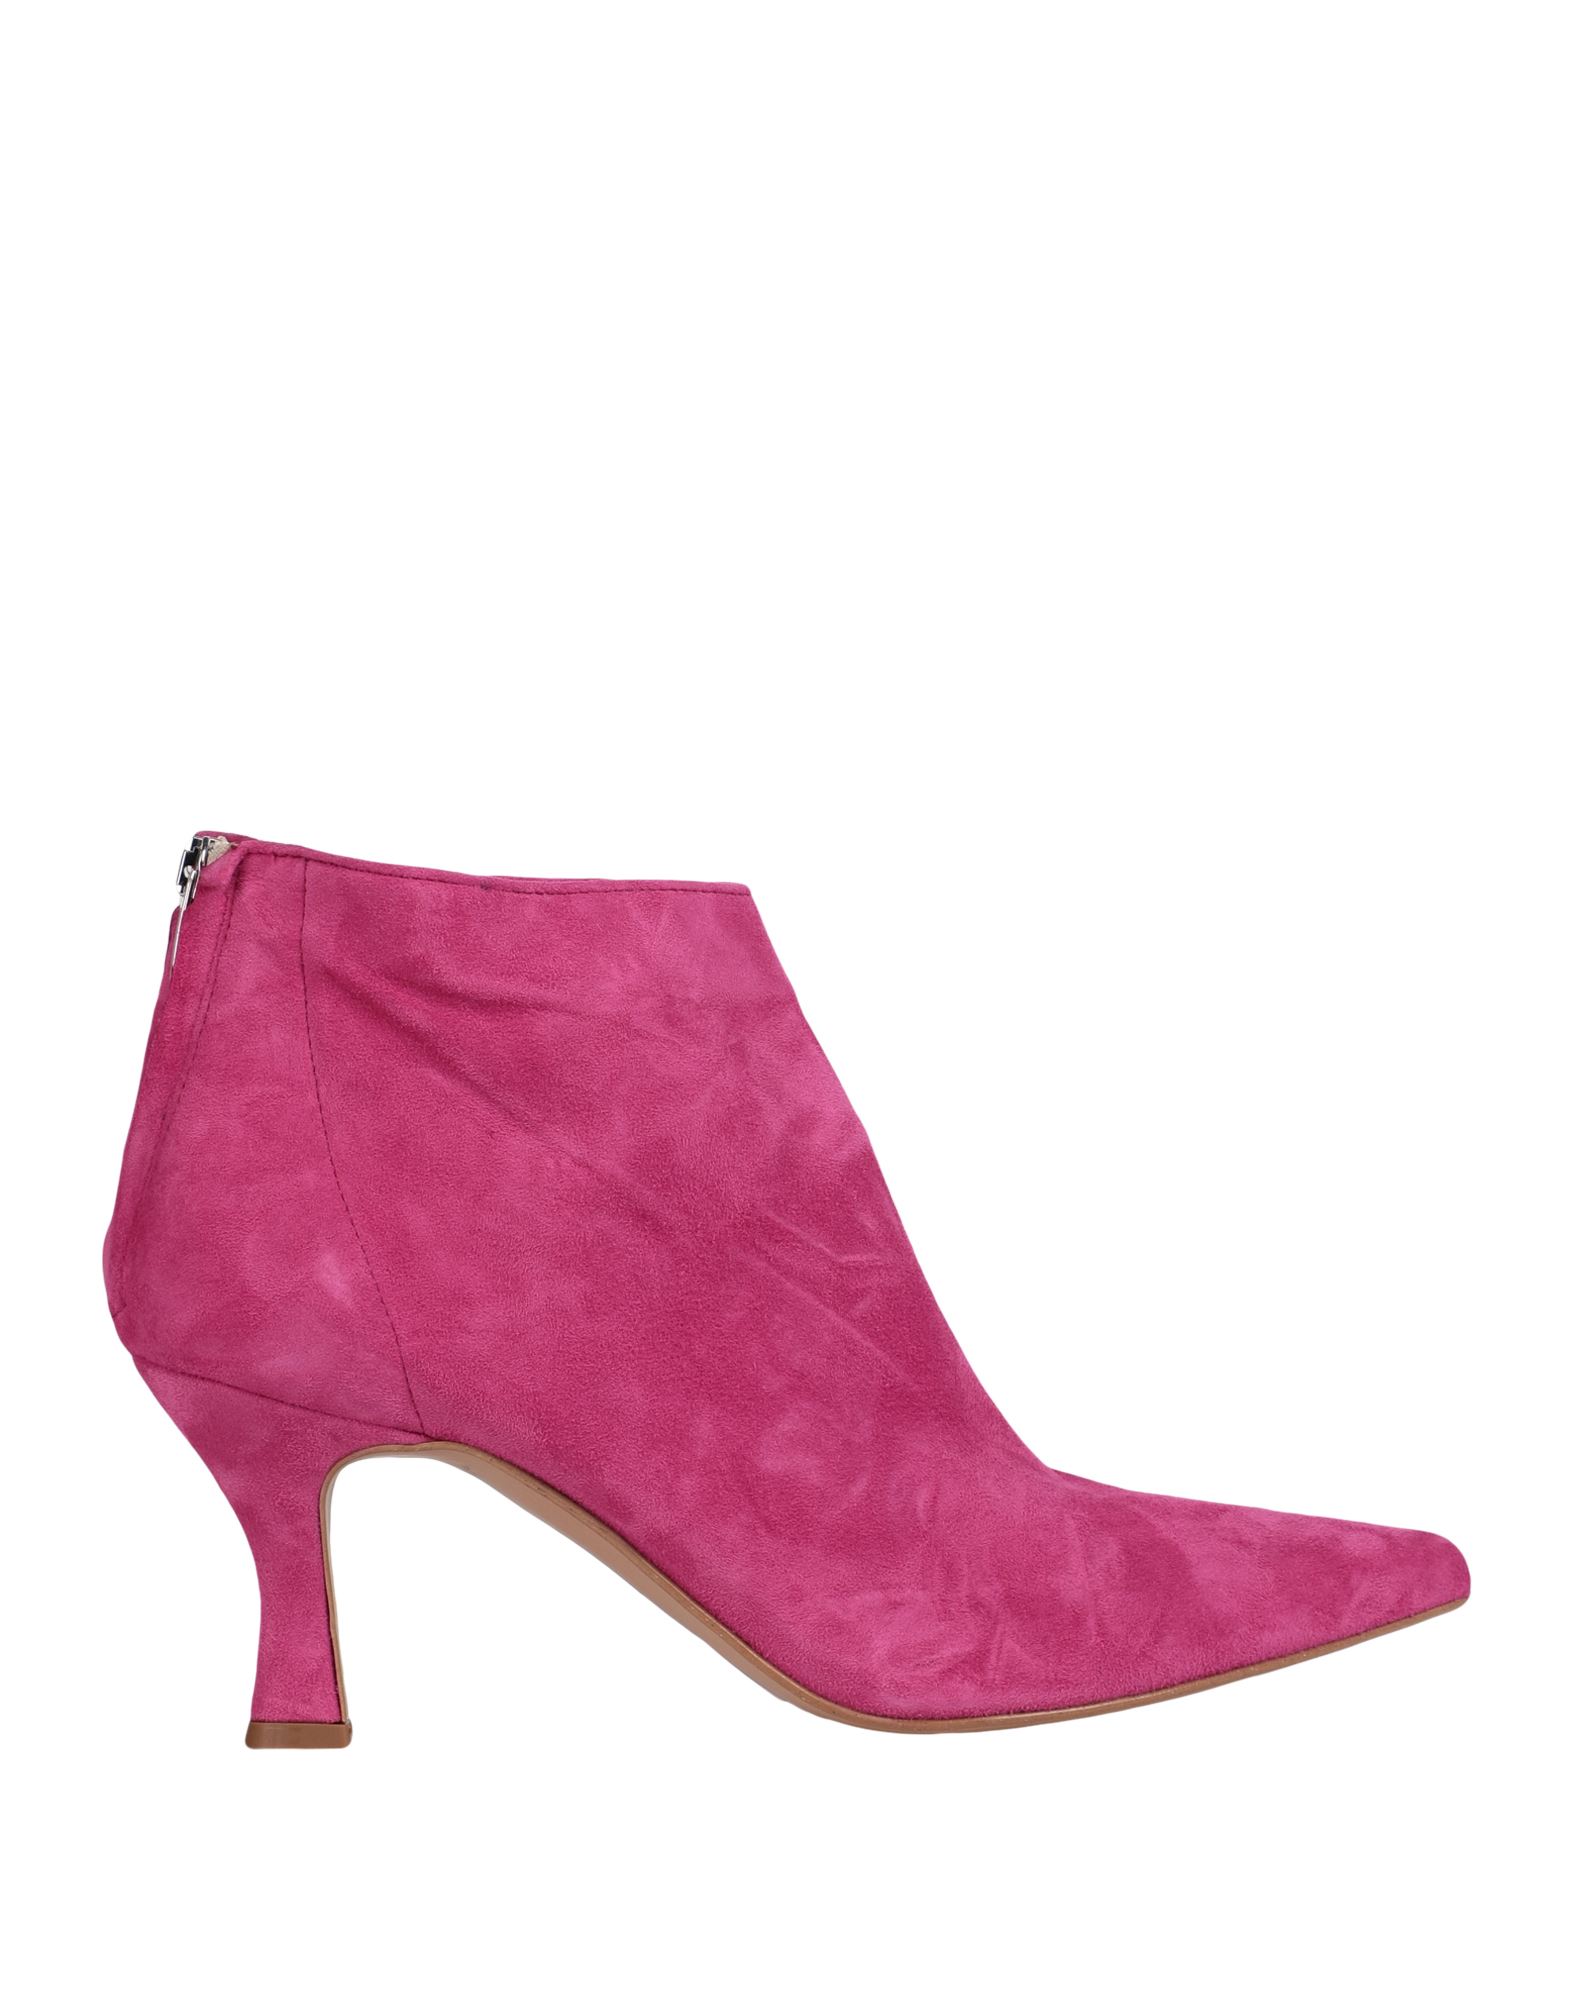 Ovye' By Cristina Lucchi Woman Ankle Boots Fuchsia Size 8 Soft Leather In Pink